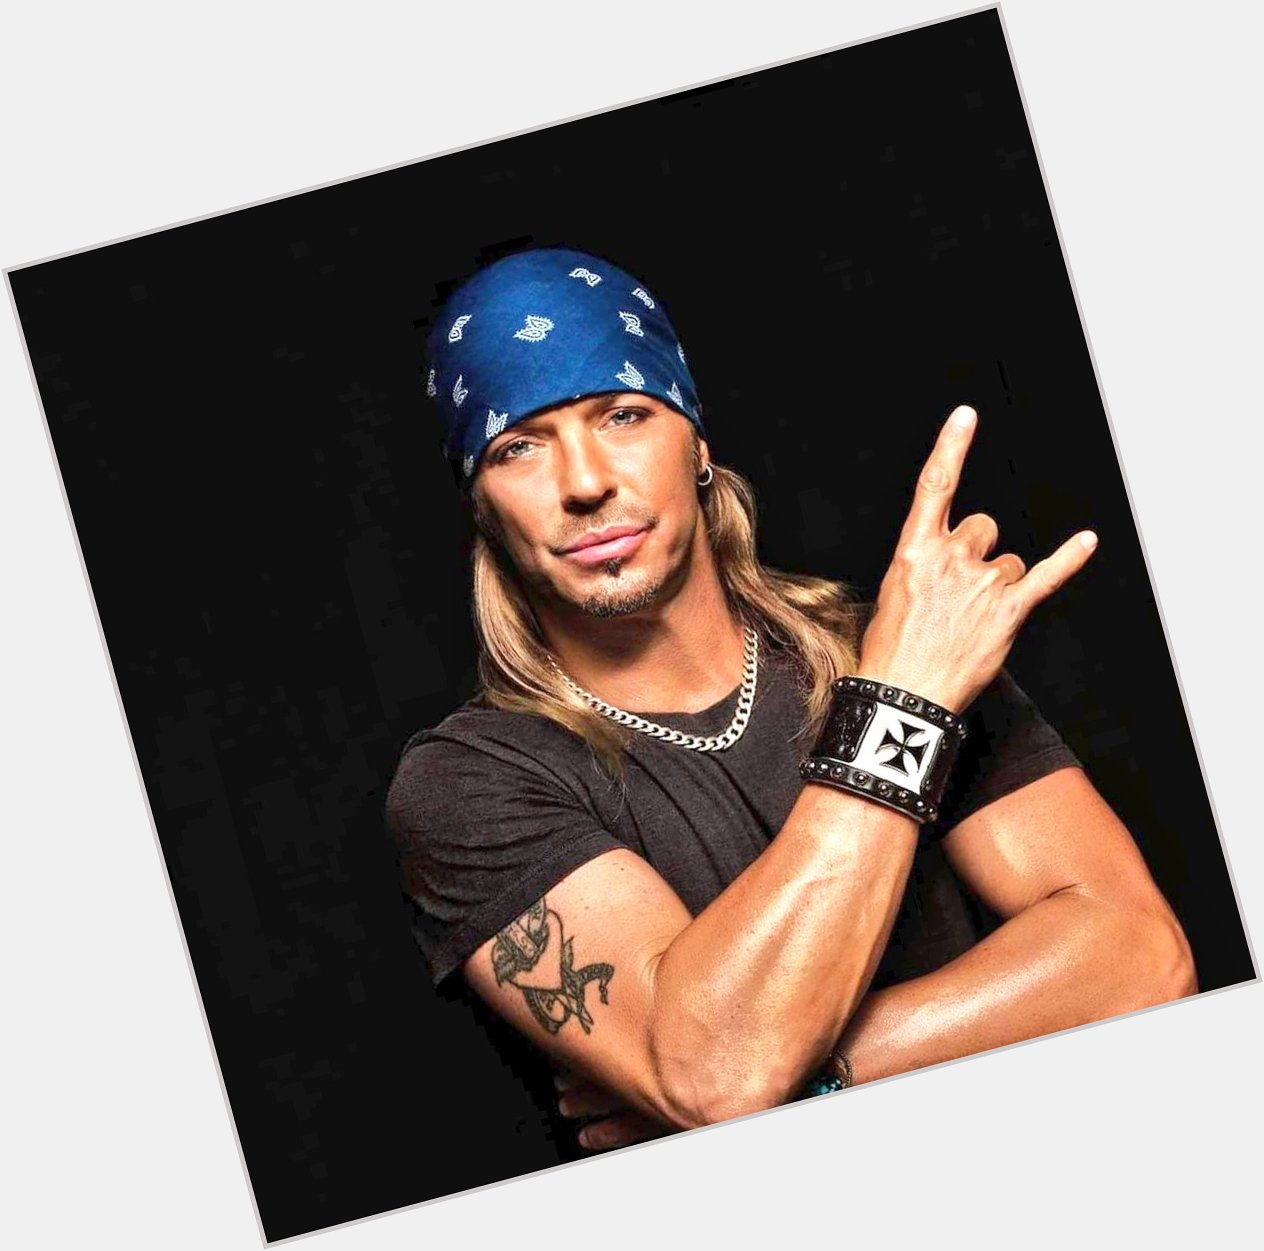 Happy birthday  BRET MICHAELS 59

What\s your favorite POISON song? 